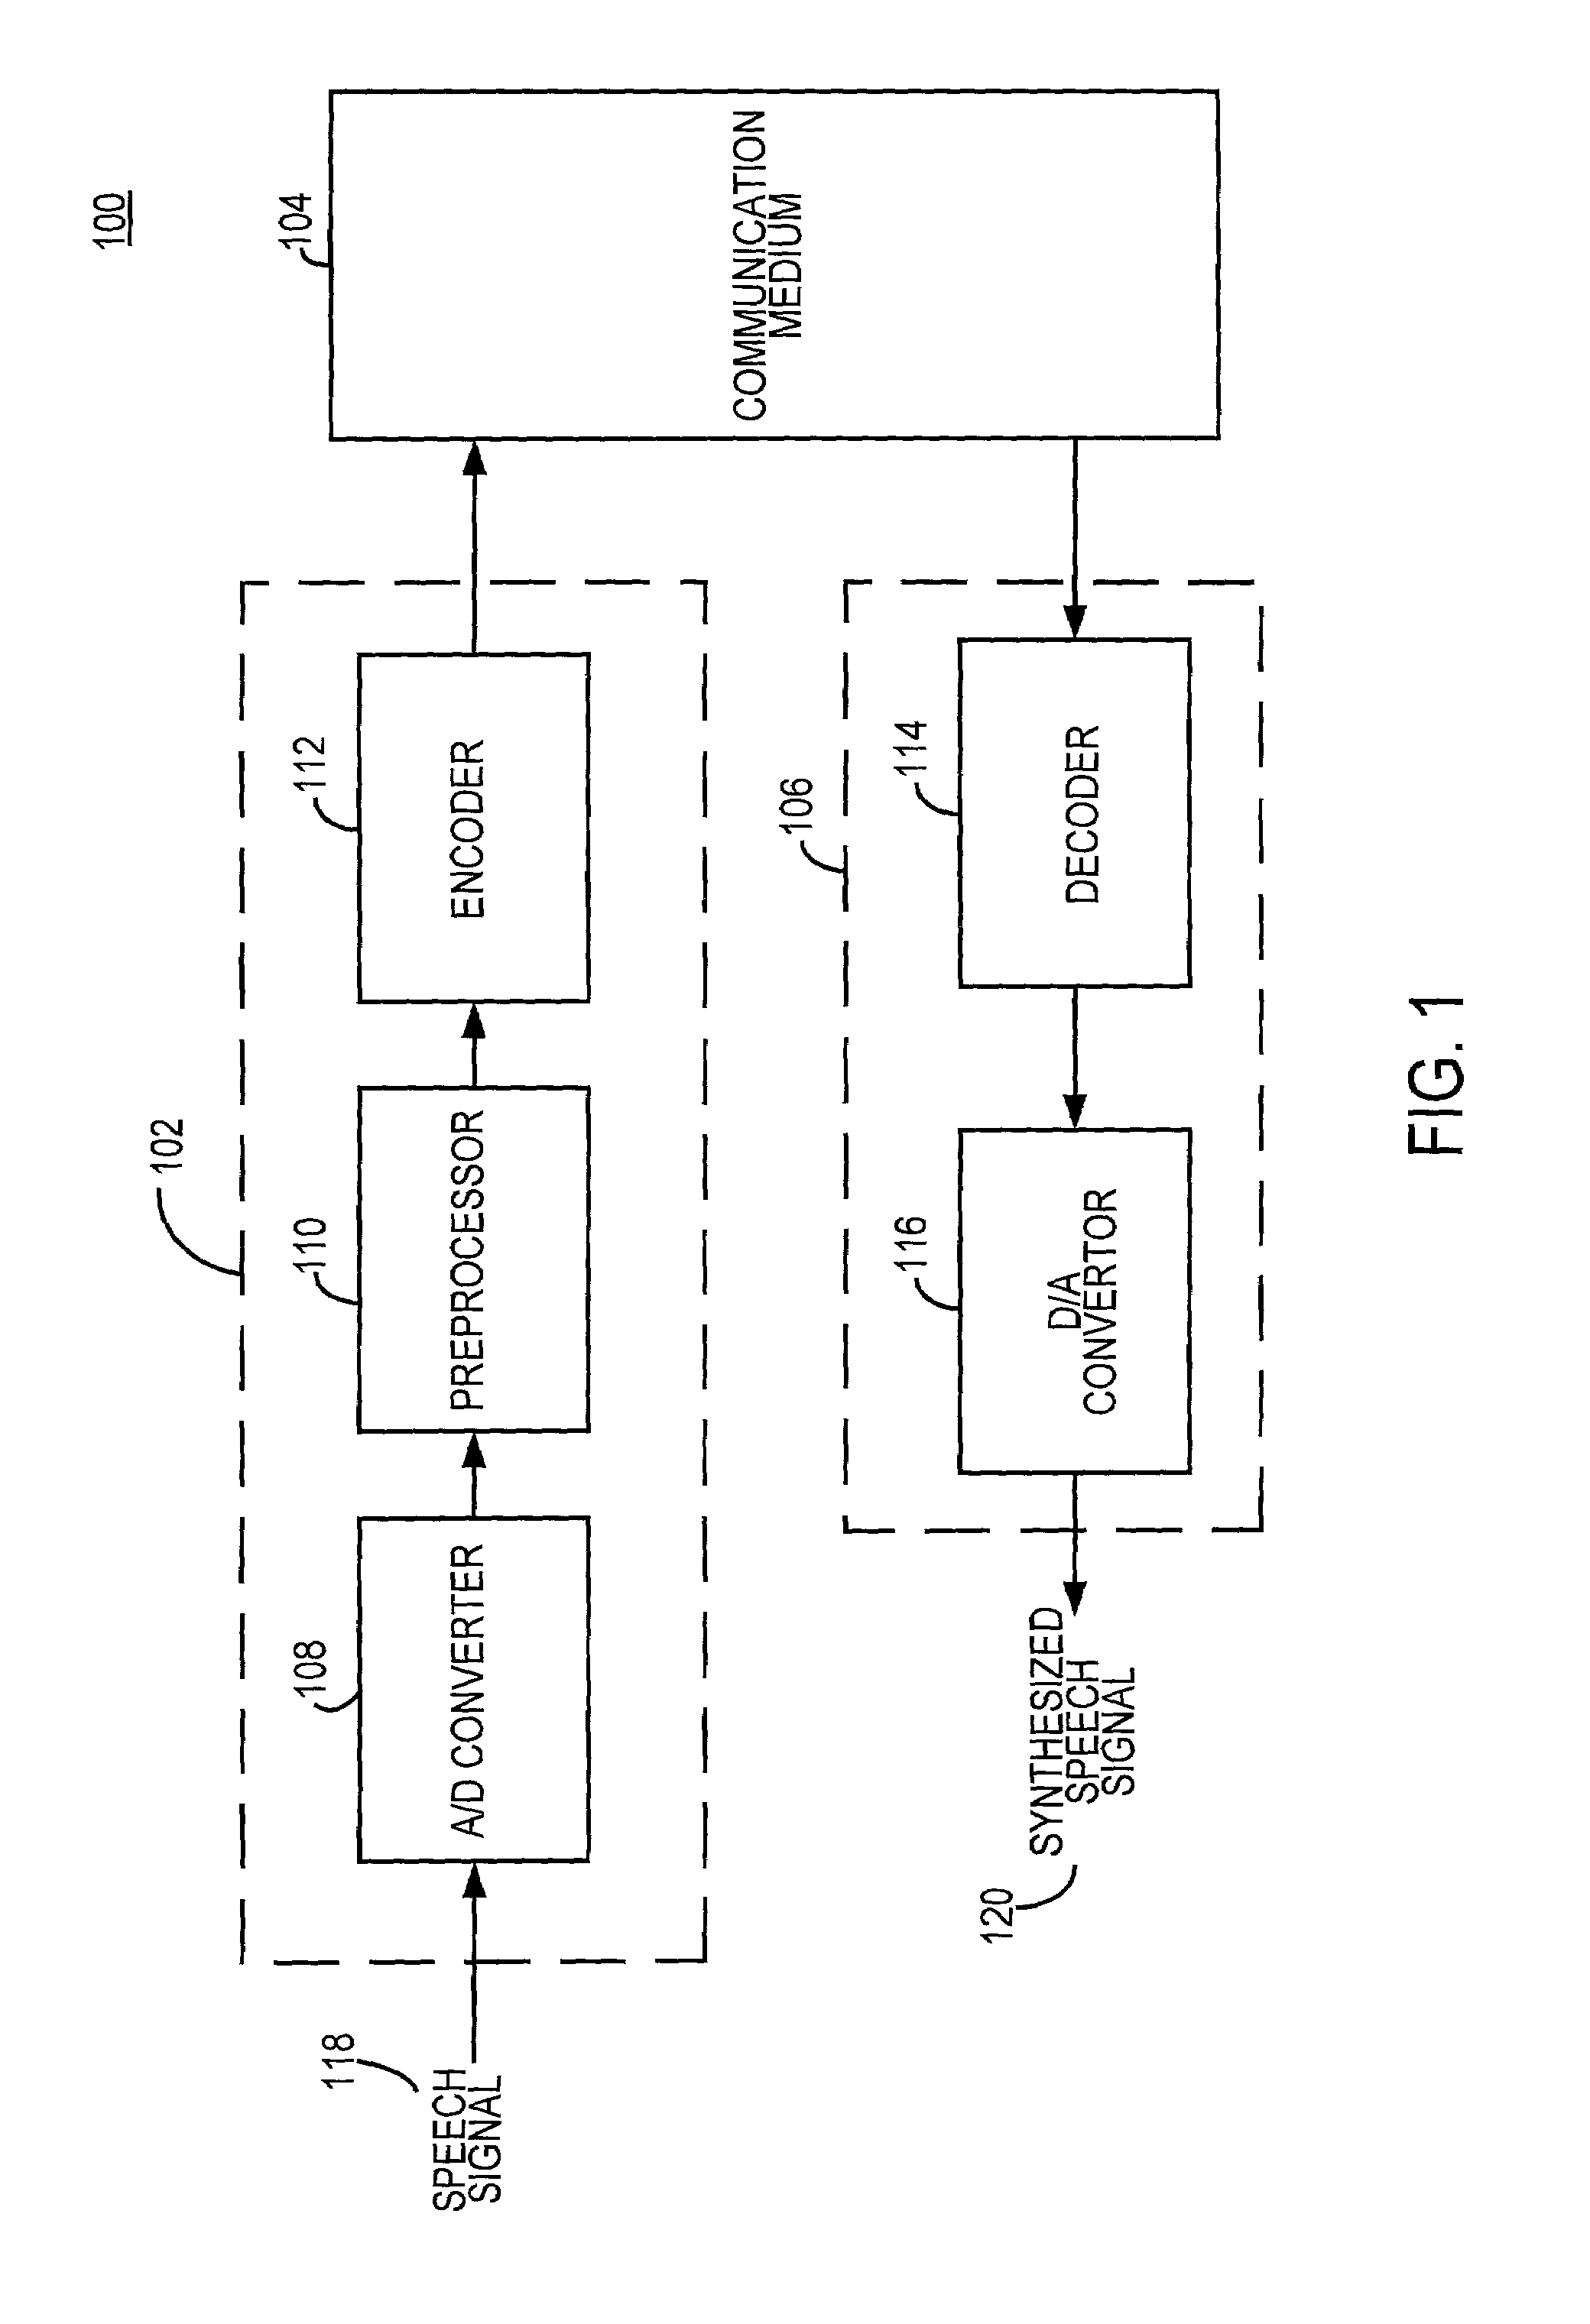 Speech coding system with time-domain noise attenuation